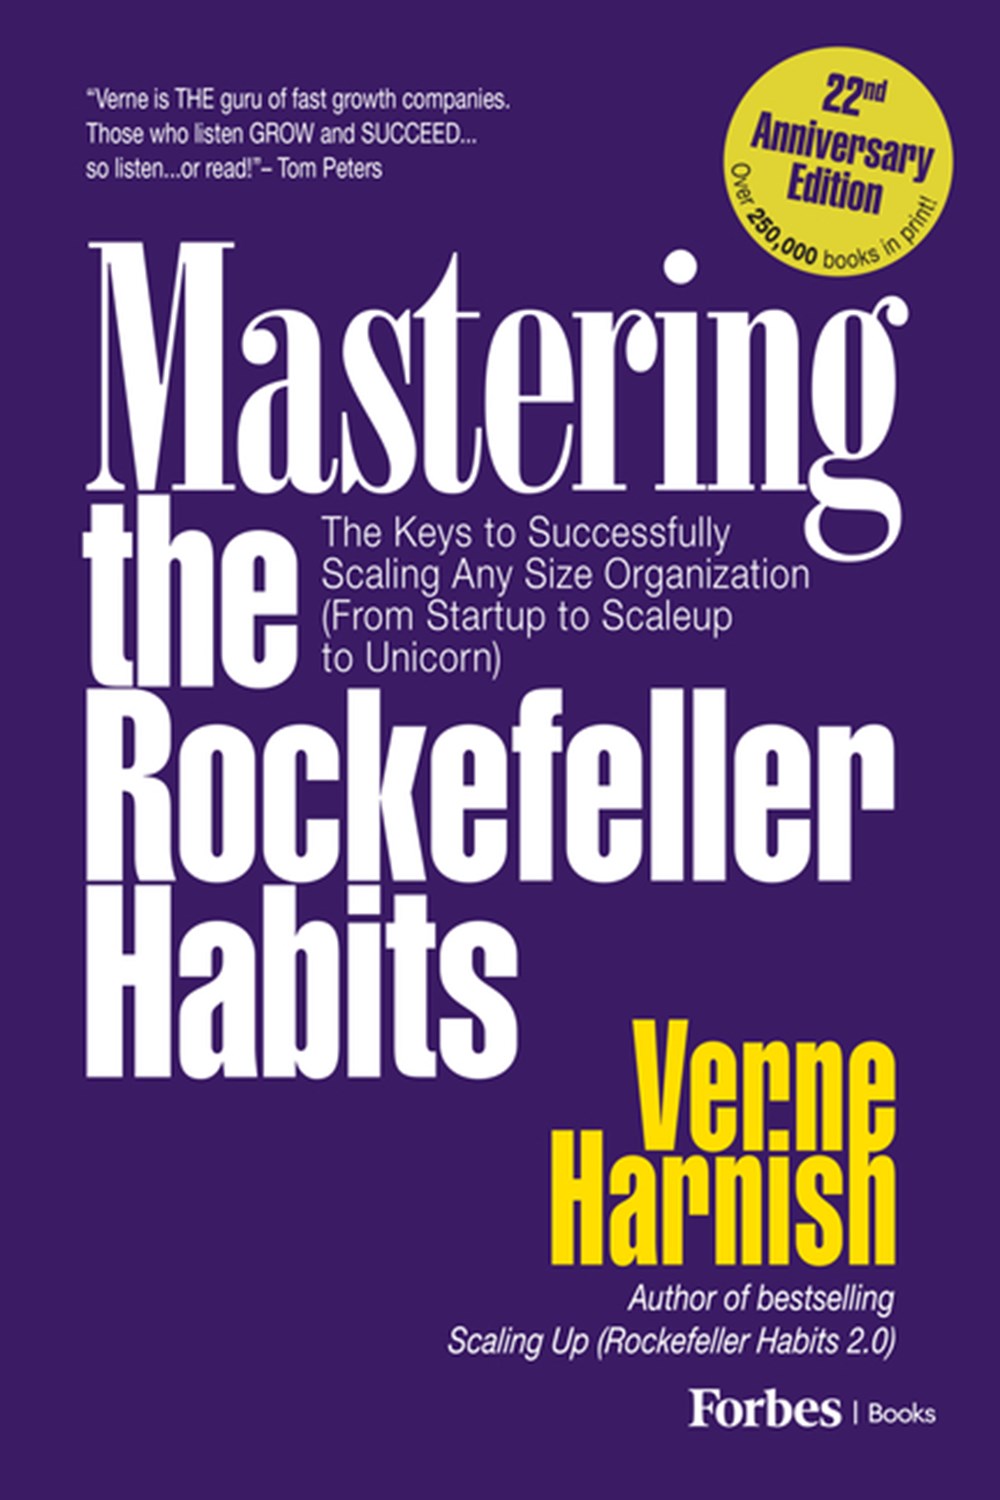 Mastering the Rockefeller Habits (22nd Anniversary Edition): The Keys to Successfully Scaling Any Or